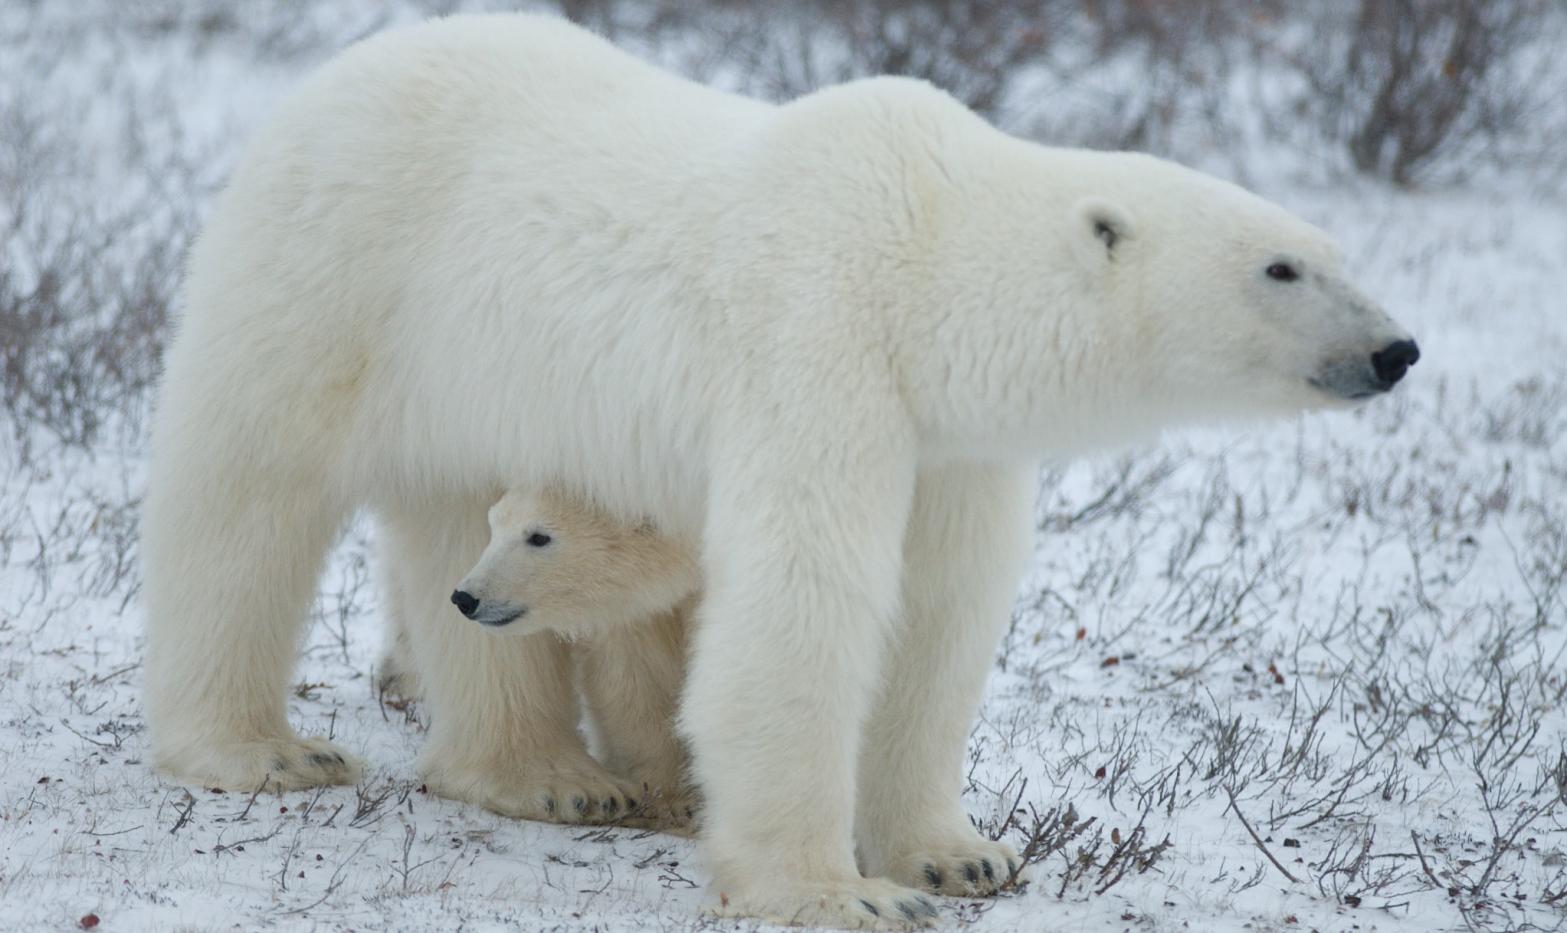 The Trump administration doesn't care about these guys. (Photo: BJ Kirschhoffer/Polar Bears International)